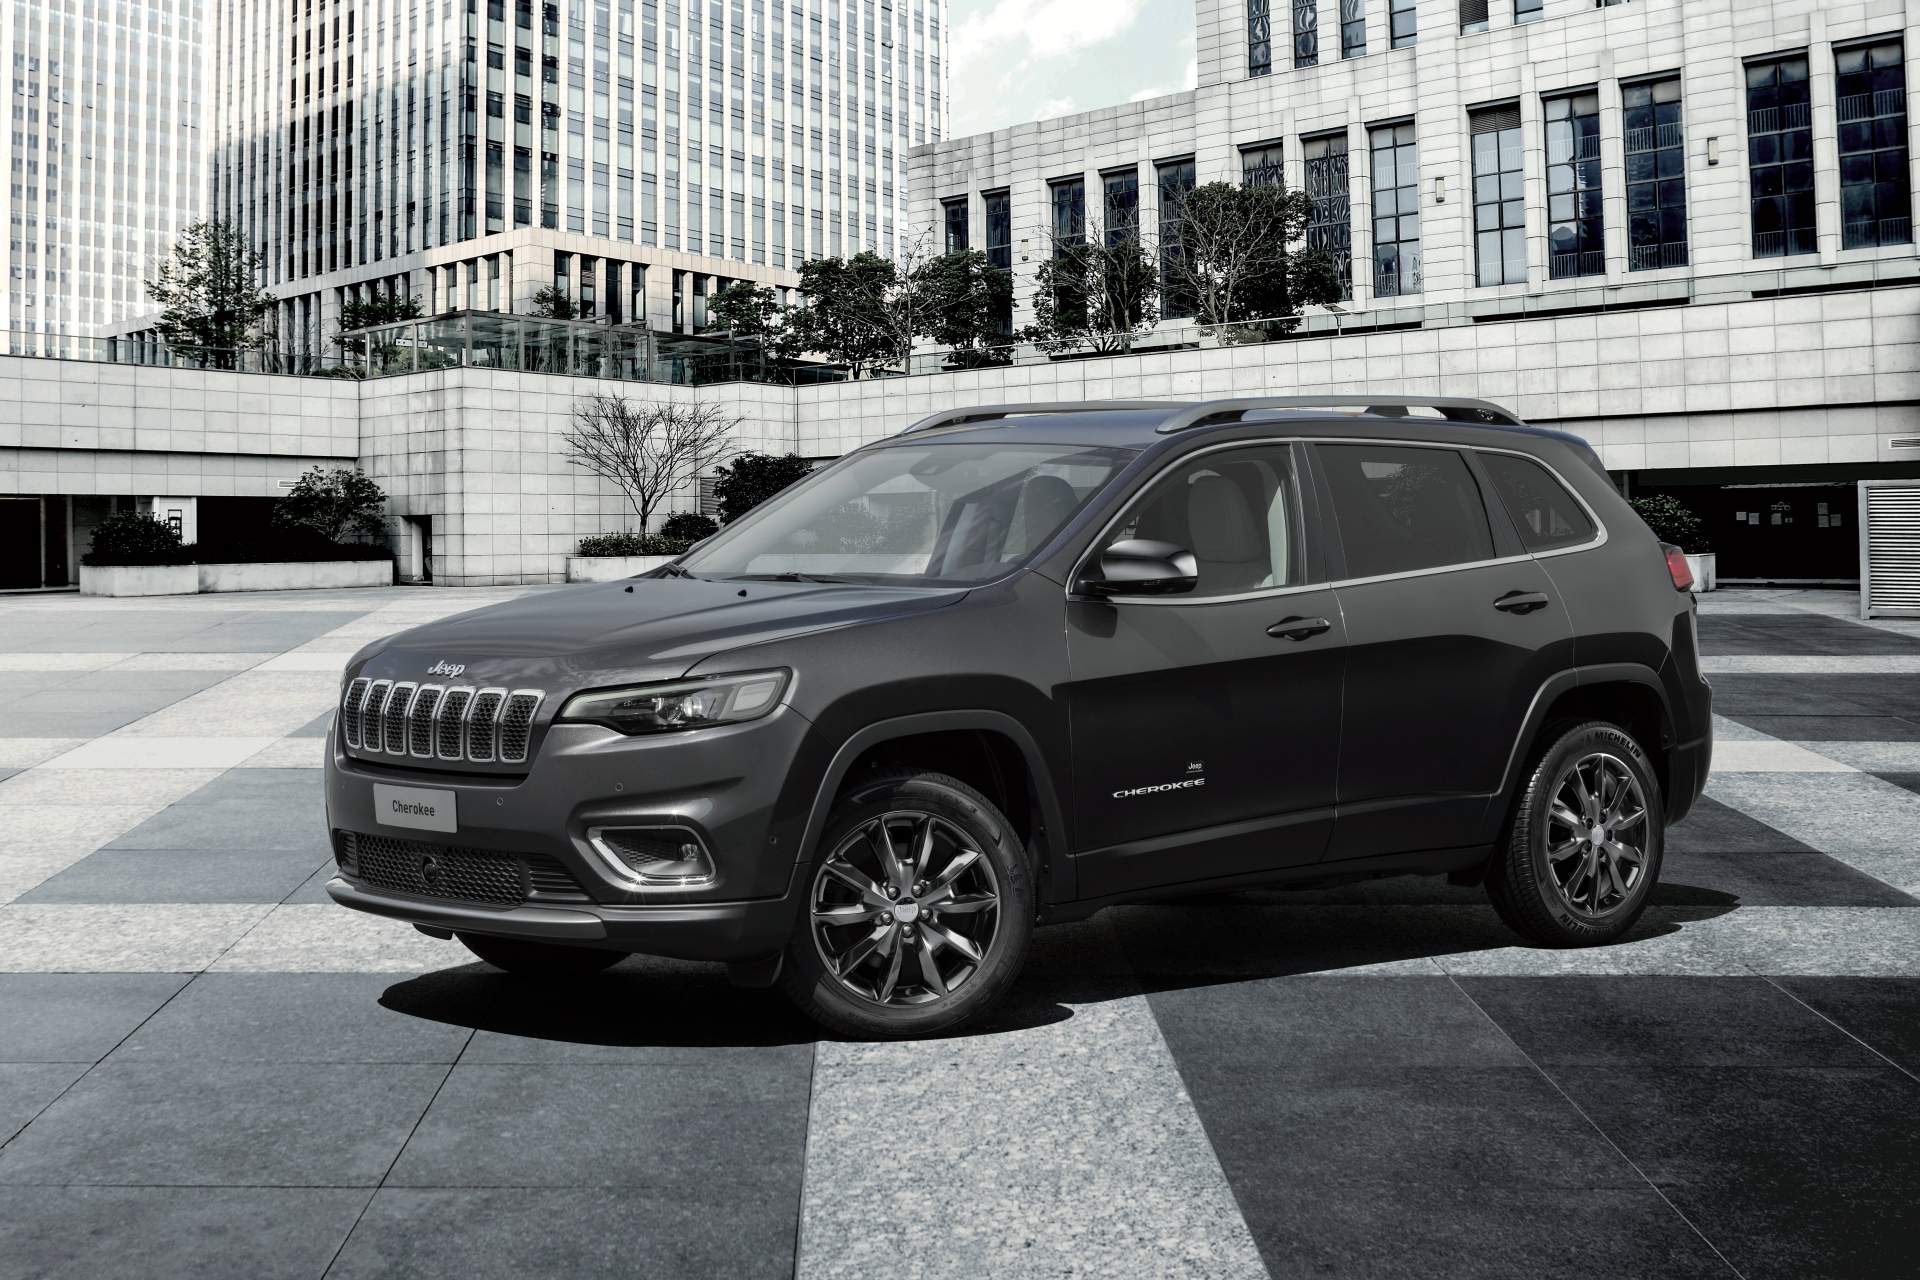 Mopar Accessories For 2019 Jeep Cherokee Bring Both Style